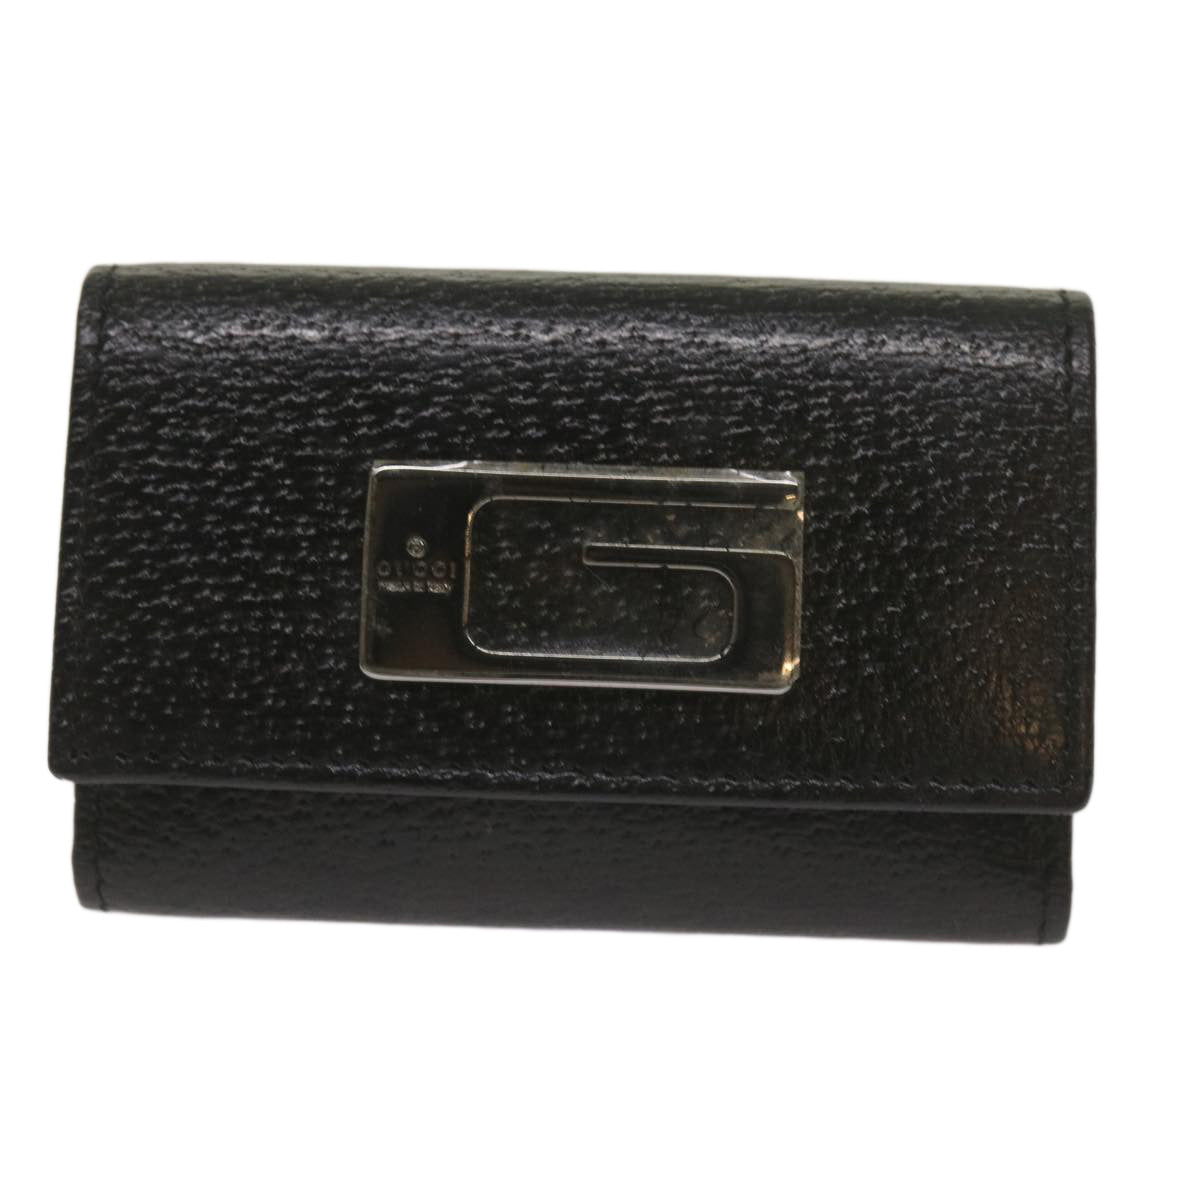 GUCCI Key Case Leather Black Auth bs11936